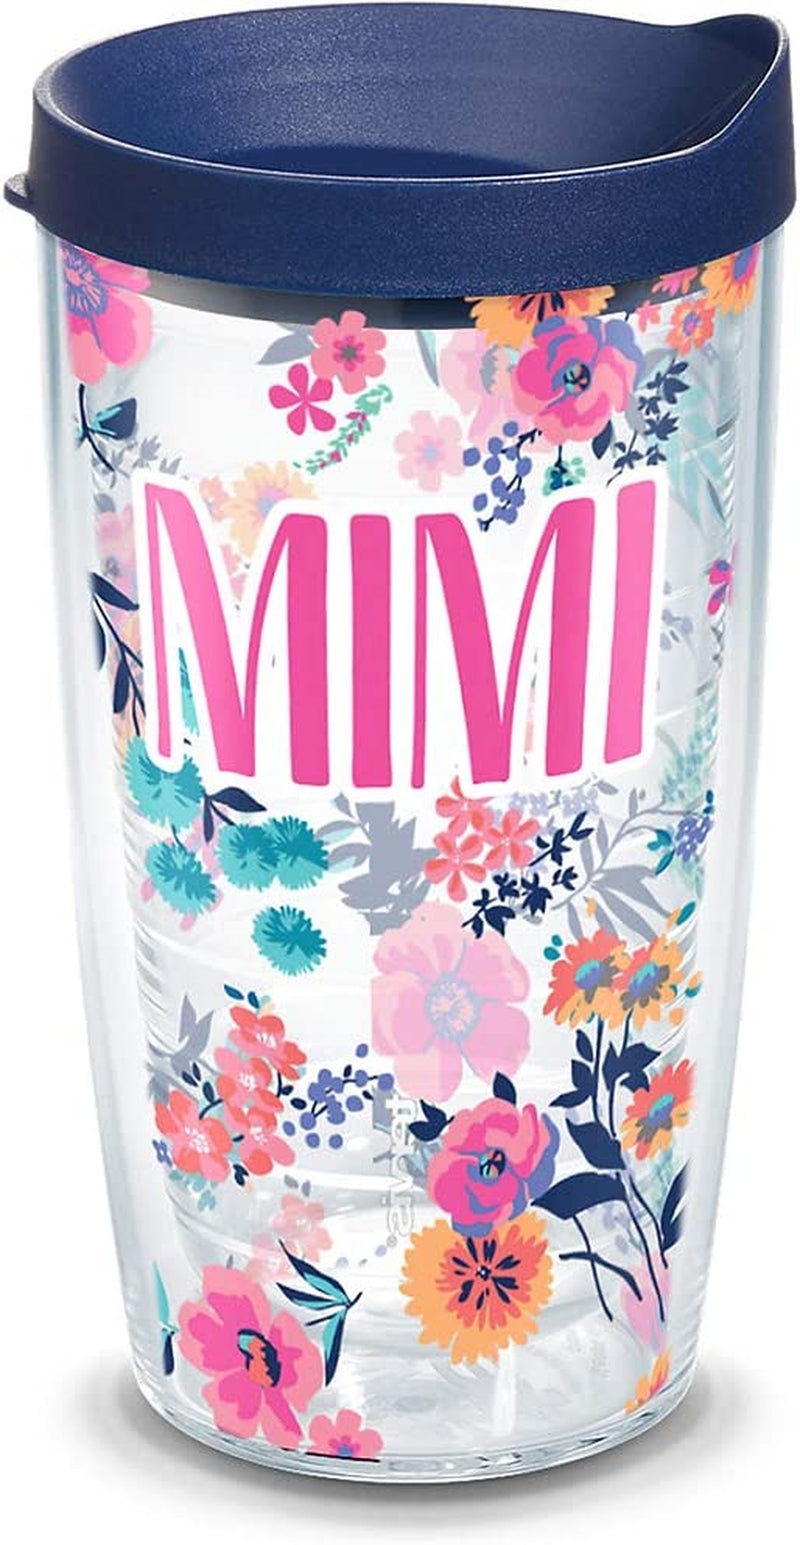 Tervis Made in USA Double Walled Dainty Floral Mother'S Day Insulated Tumbler Cup Keeps Drinks Cold & Hot, 16Oz, Gigi